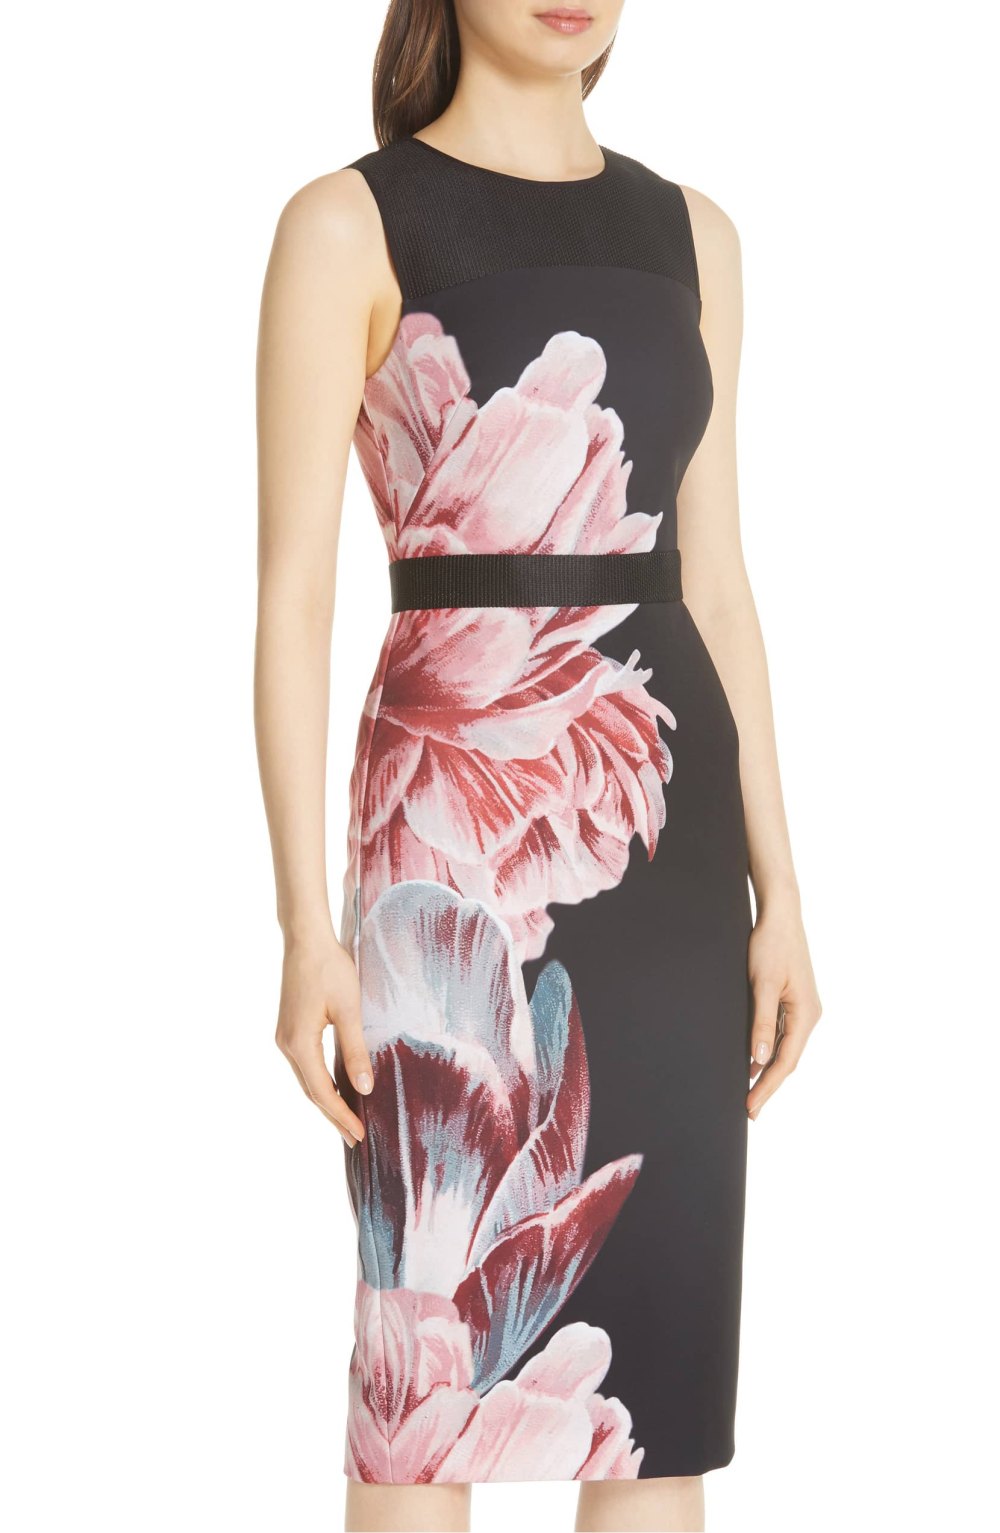 Shop This Ted Baker London Sheath Dress for a Polished Look | Us Weekly